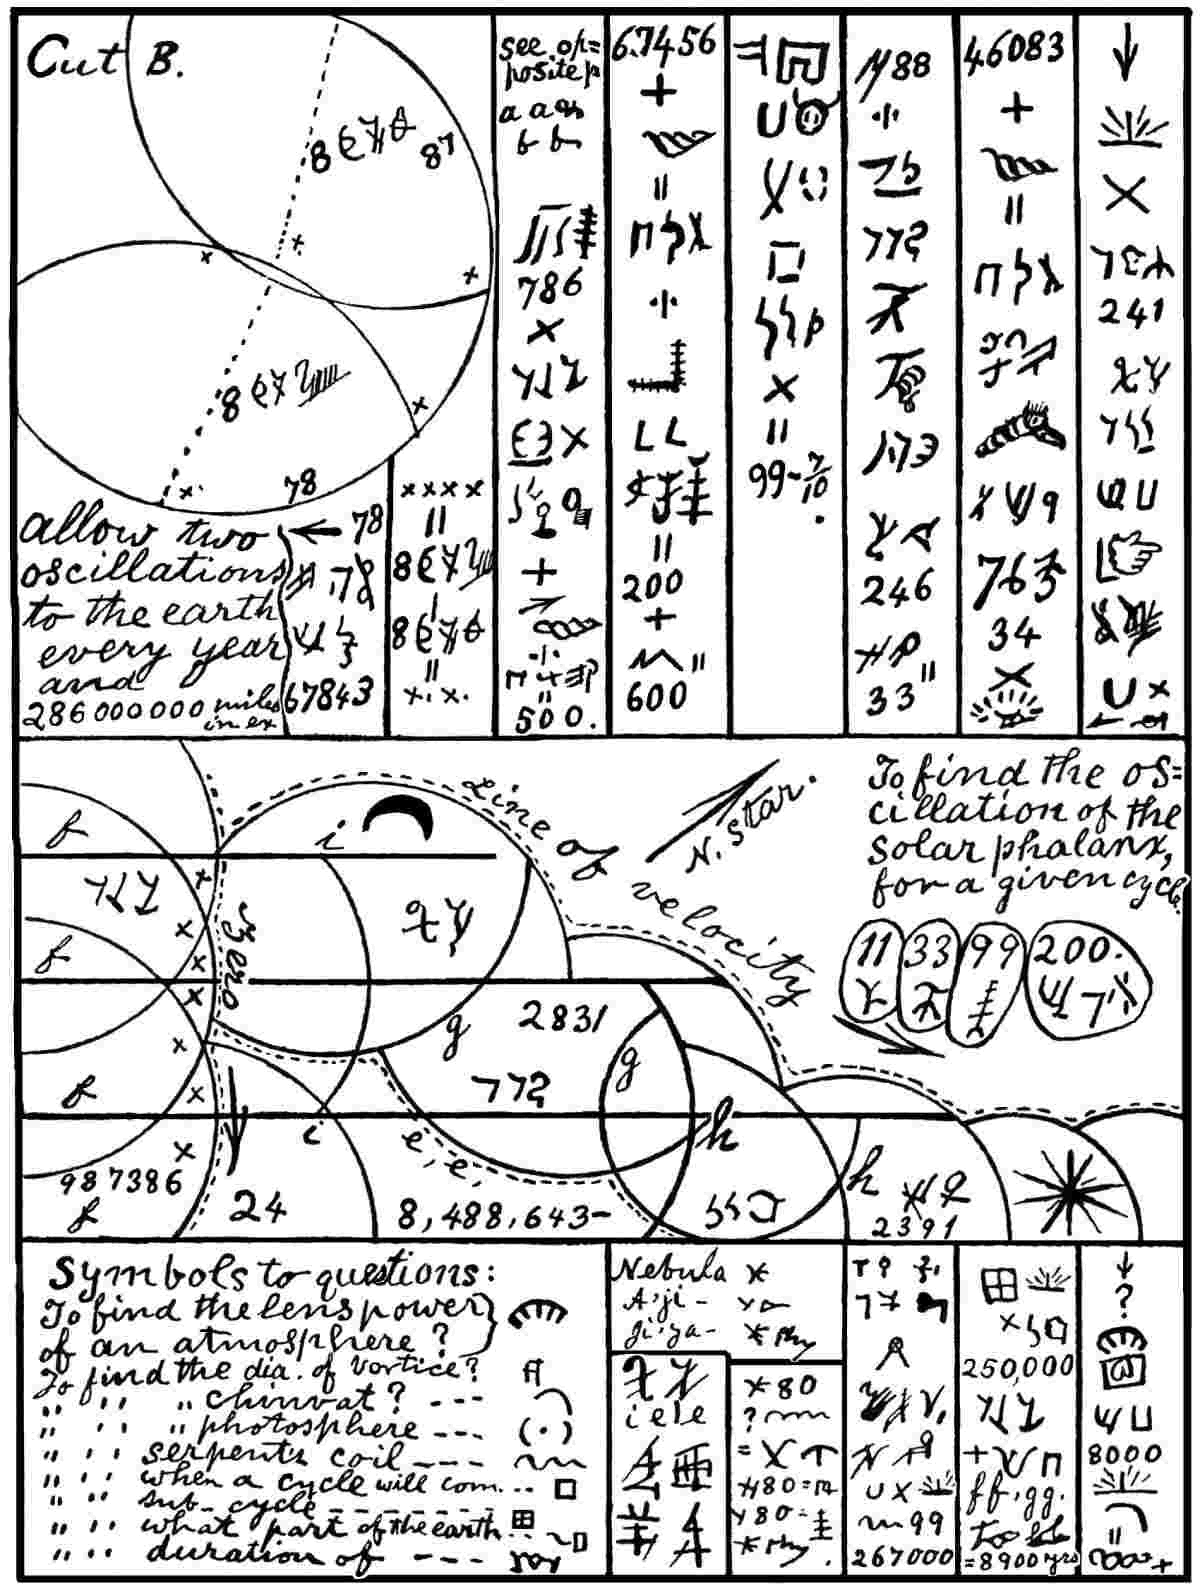 i101 Mathematics of Planetary Oscillations. Zero (line of velocity), with the two arrows, and the parallel lines crossing, are the signs of boundary to a vortex. The oscillations of a planet are shown in the curves. In order to reduce the Panic signs to English, see Book of Saphah; also see image i100 Cevorkum.